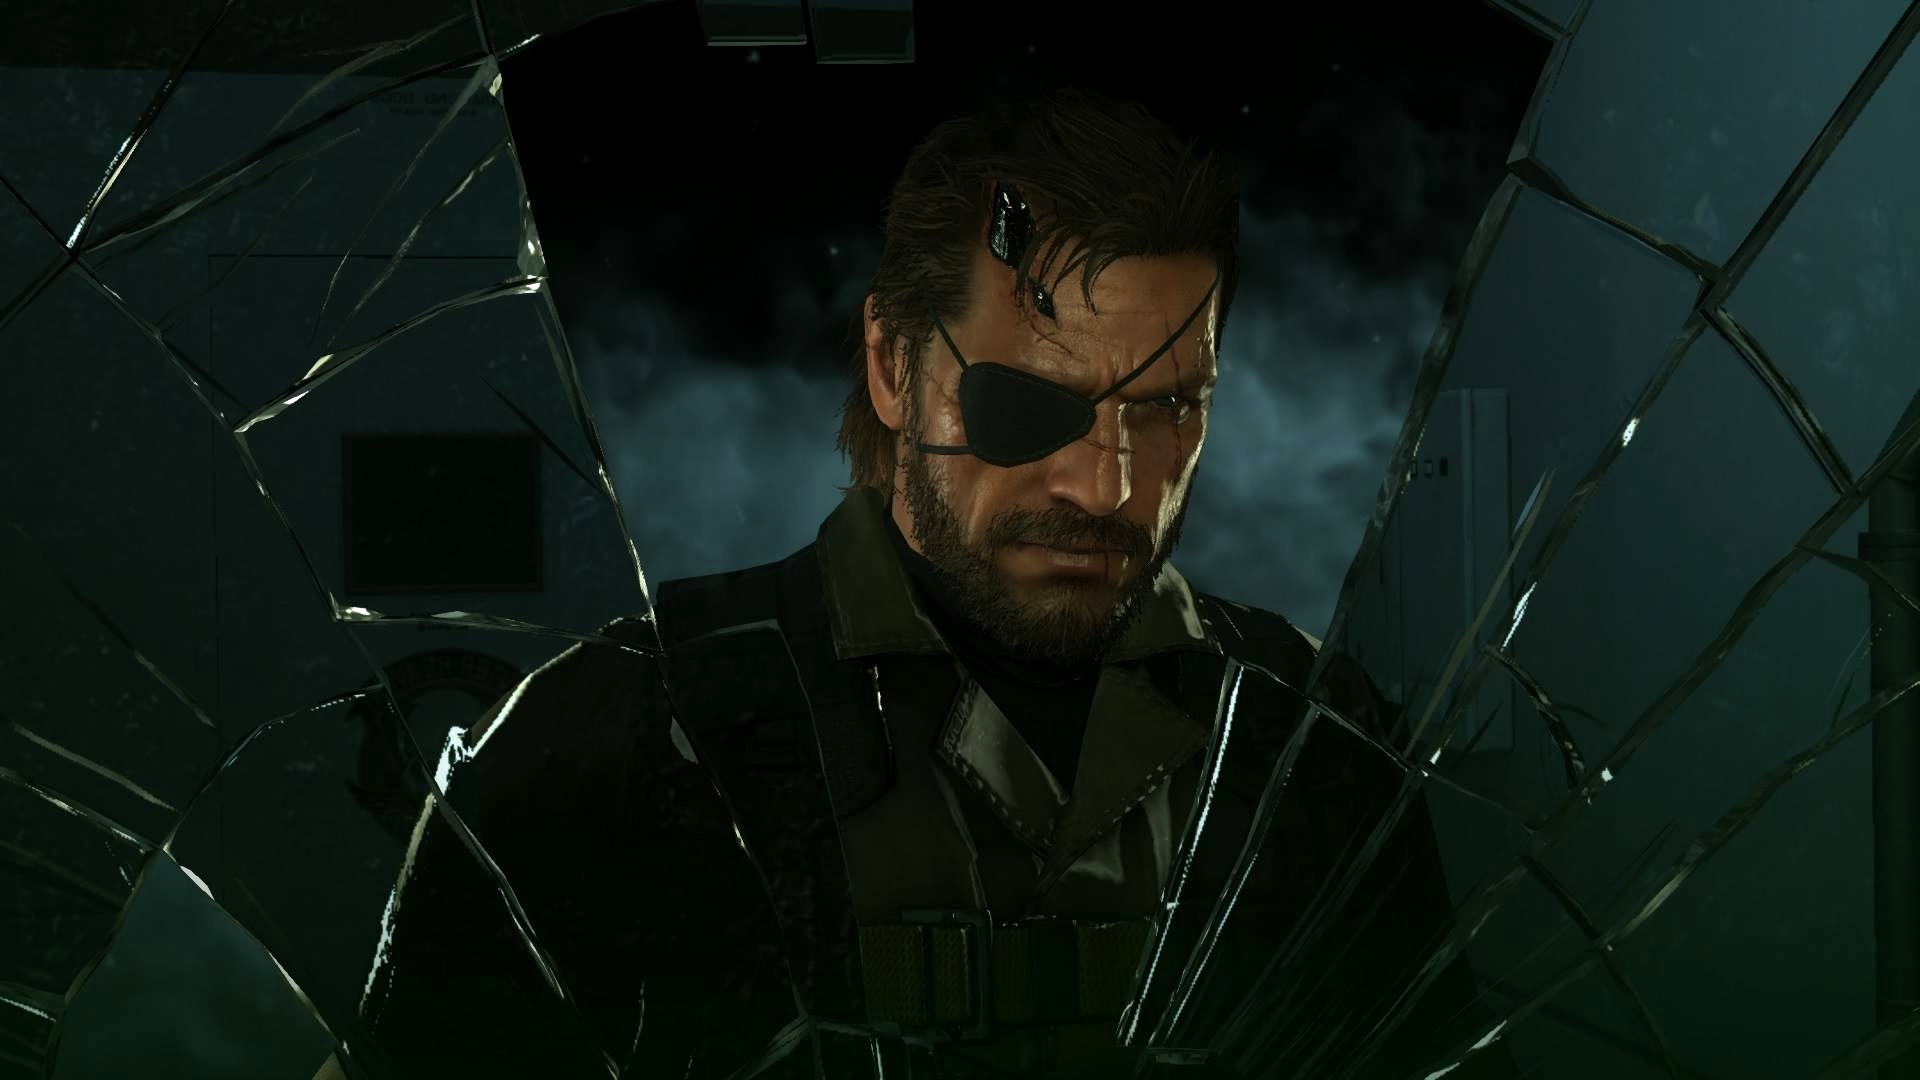 Metal Gear Solid V: The Pahntom Pain.